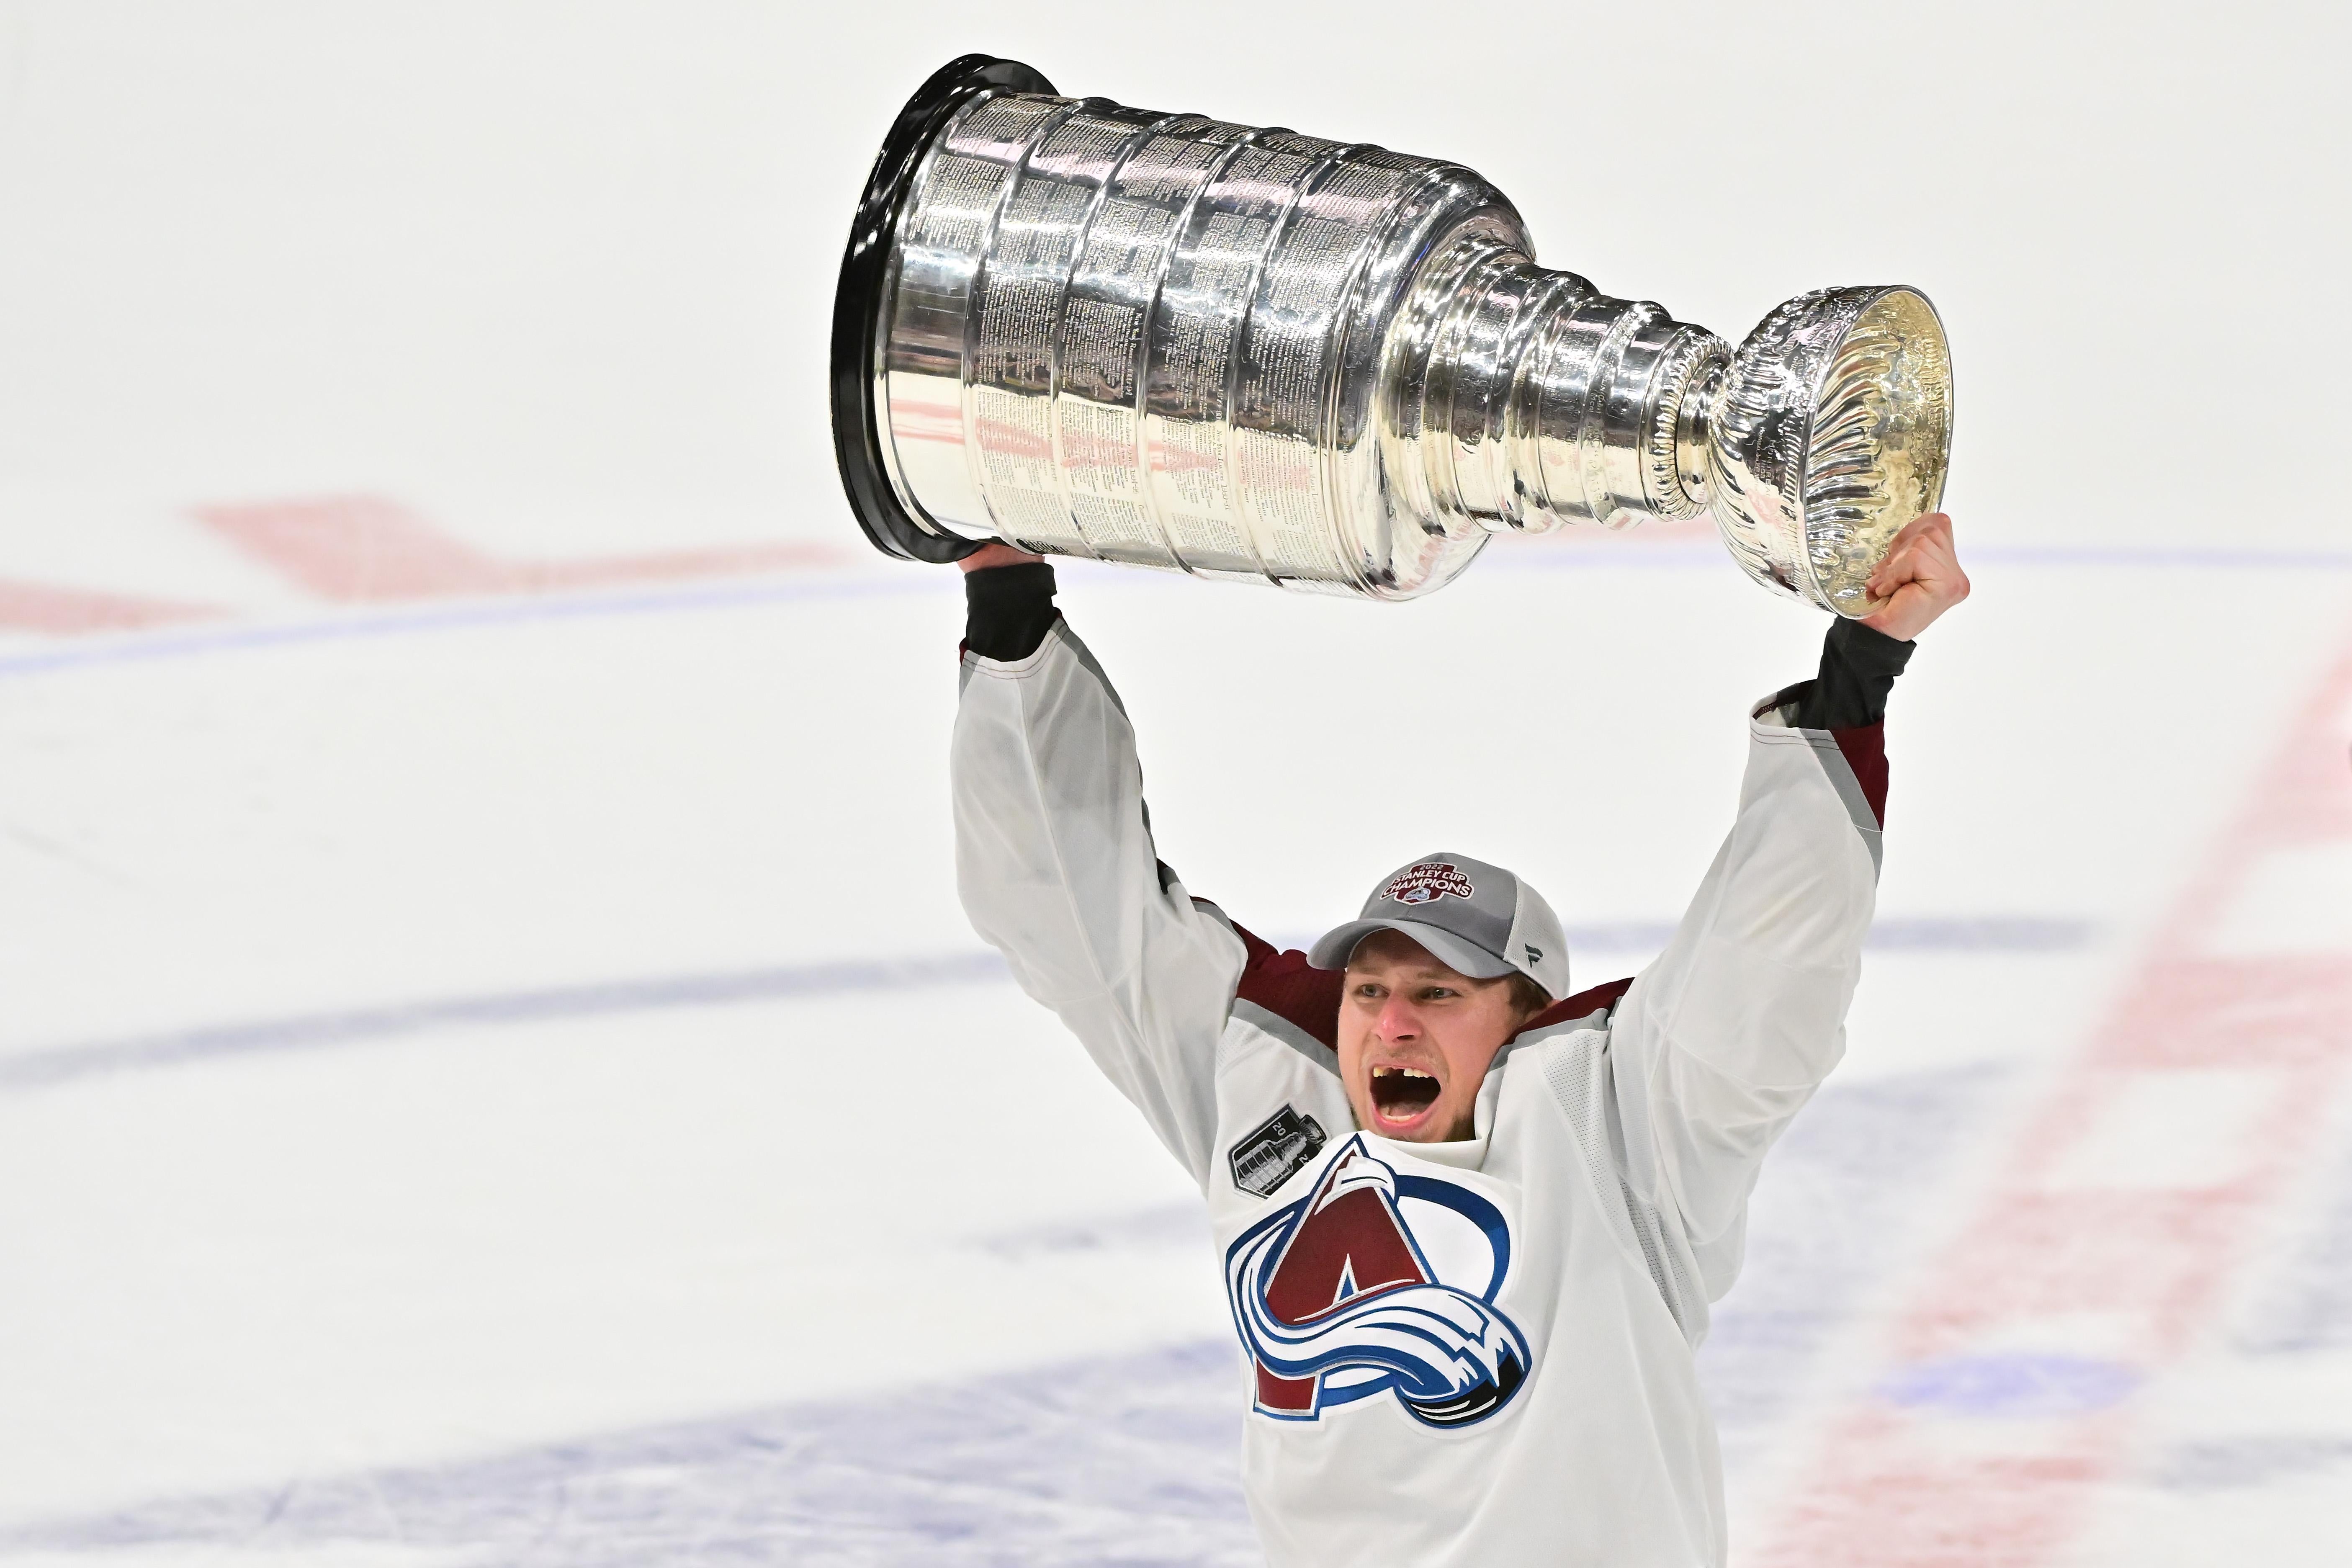 Johnson, missing several front teeth, screams in celebration and hoists the Cup above his head.